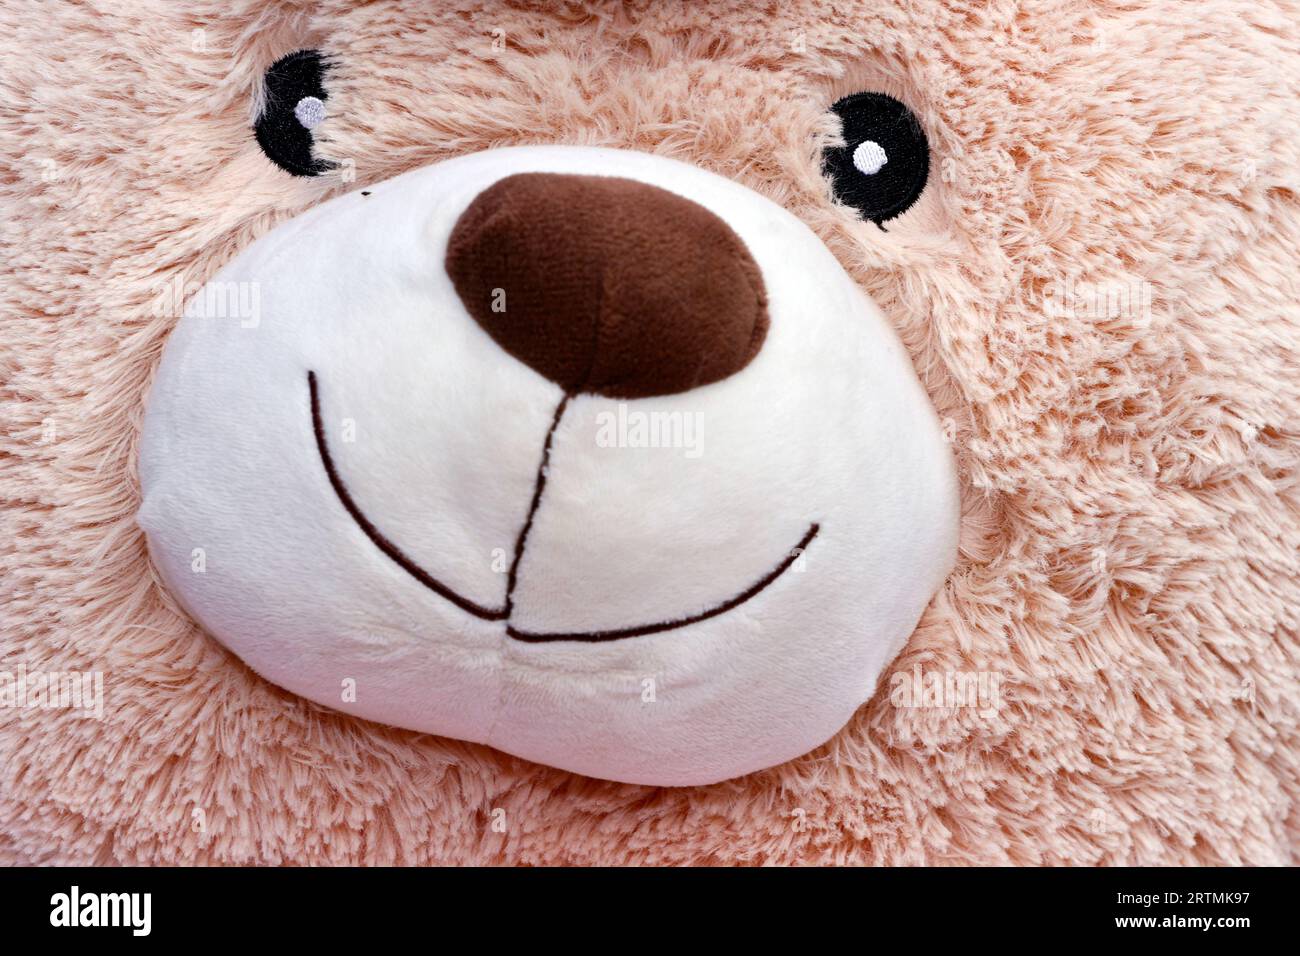 Head of a large  teddy bear. Children's soft toy.  France. Stock Photo